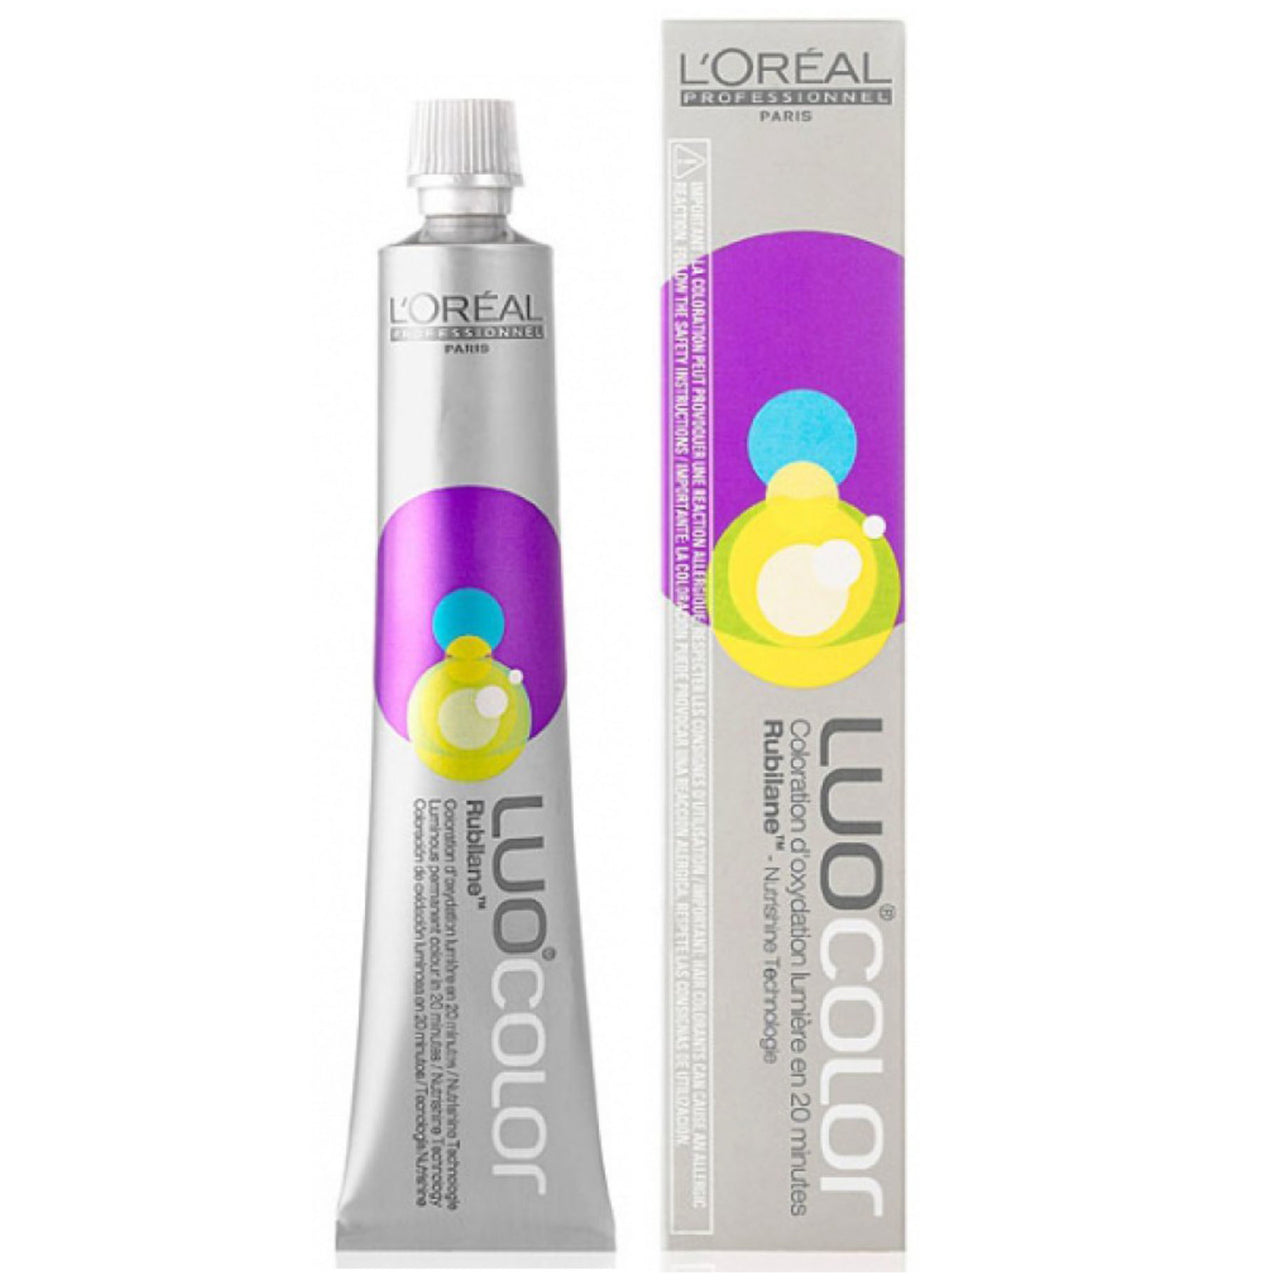 Luo-Farbe 50ml